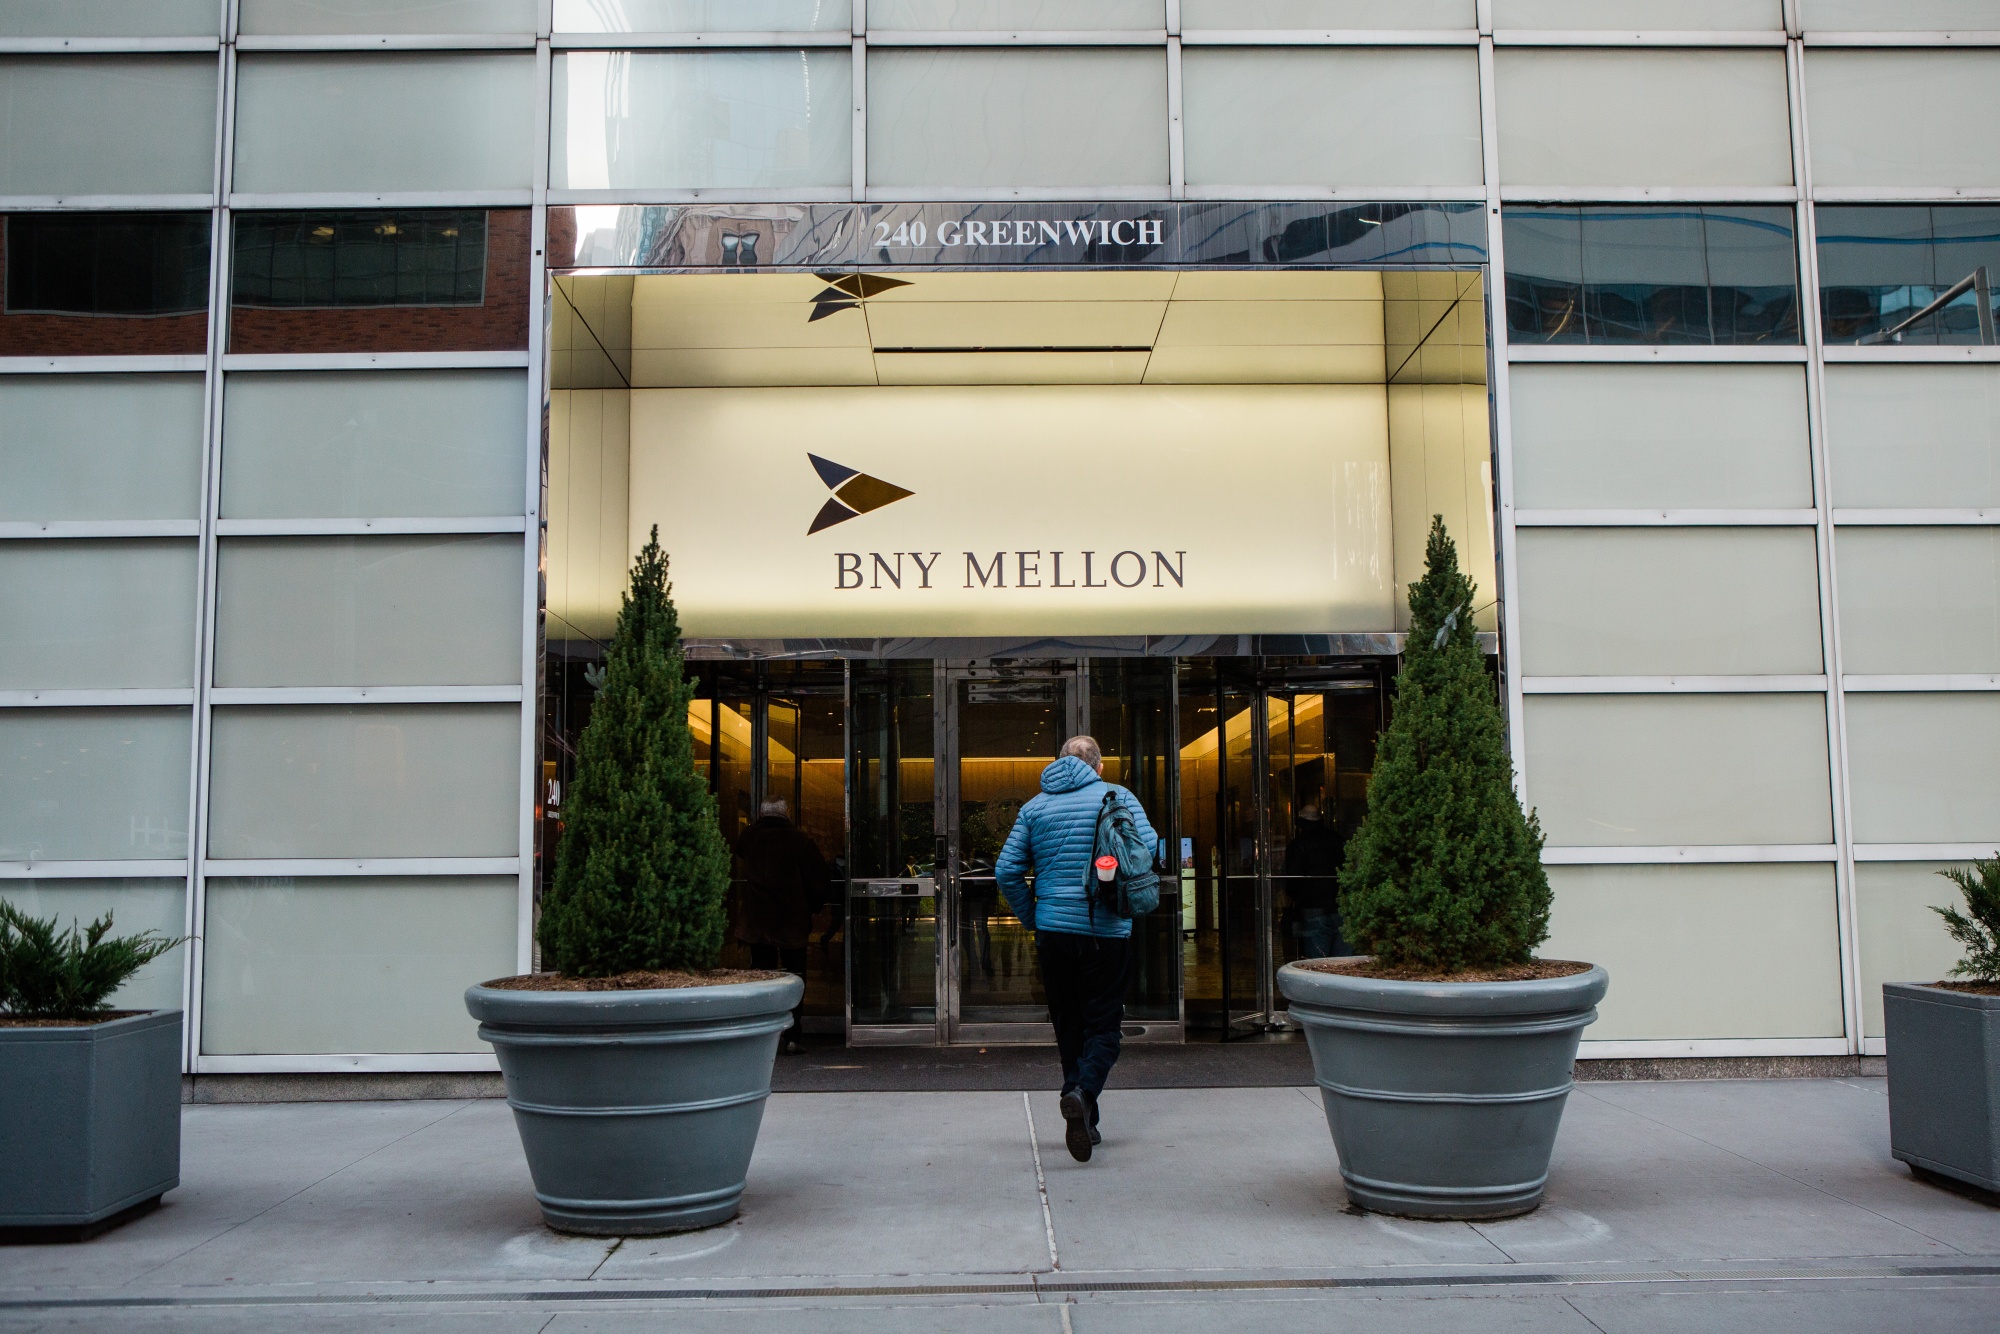 BNY Mellon to Cut About 3% of Staff as Wall Street Retrenches - Bloomberg